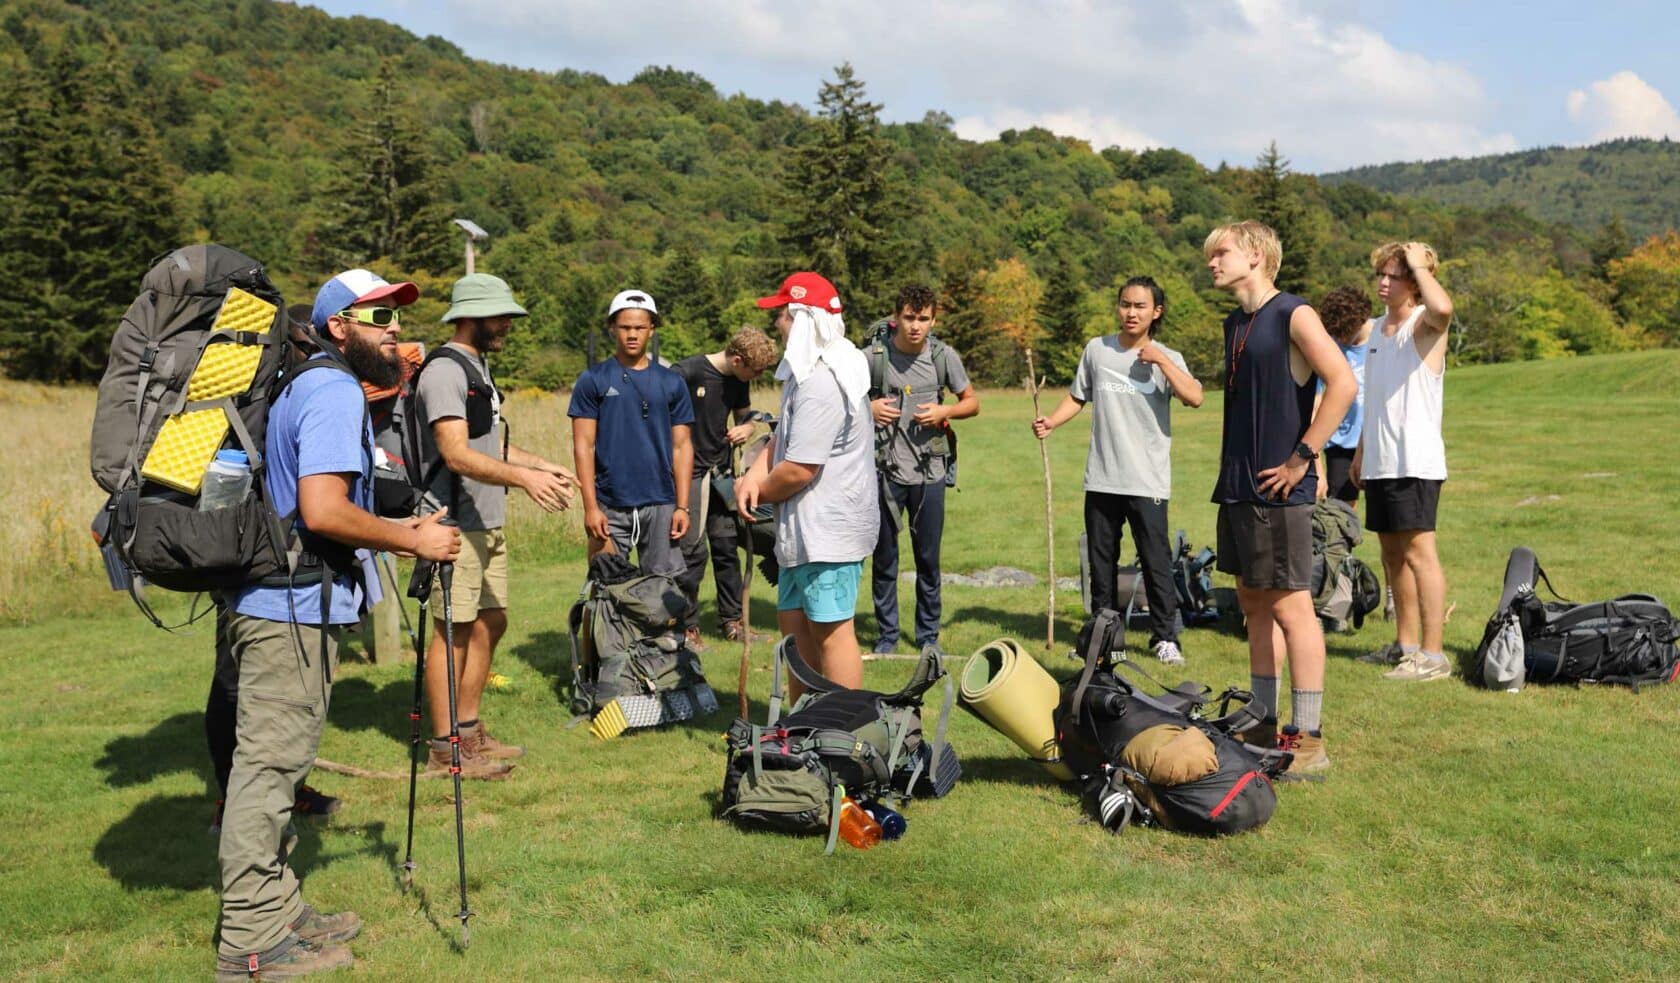 A group of people getting ready for backpacking.